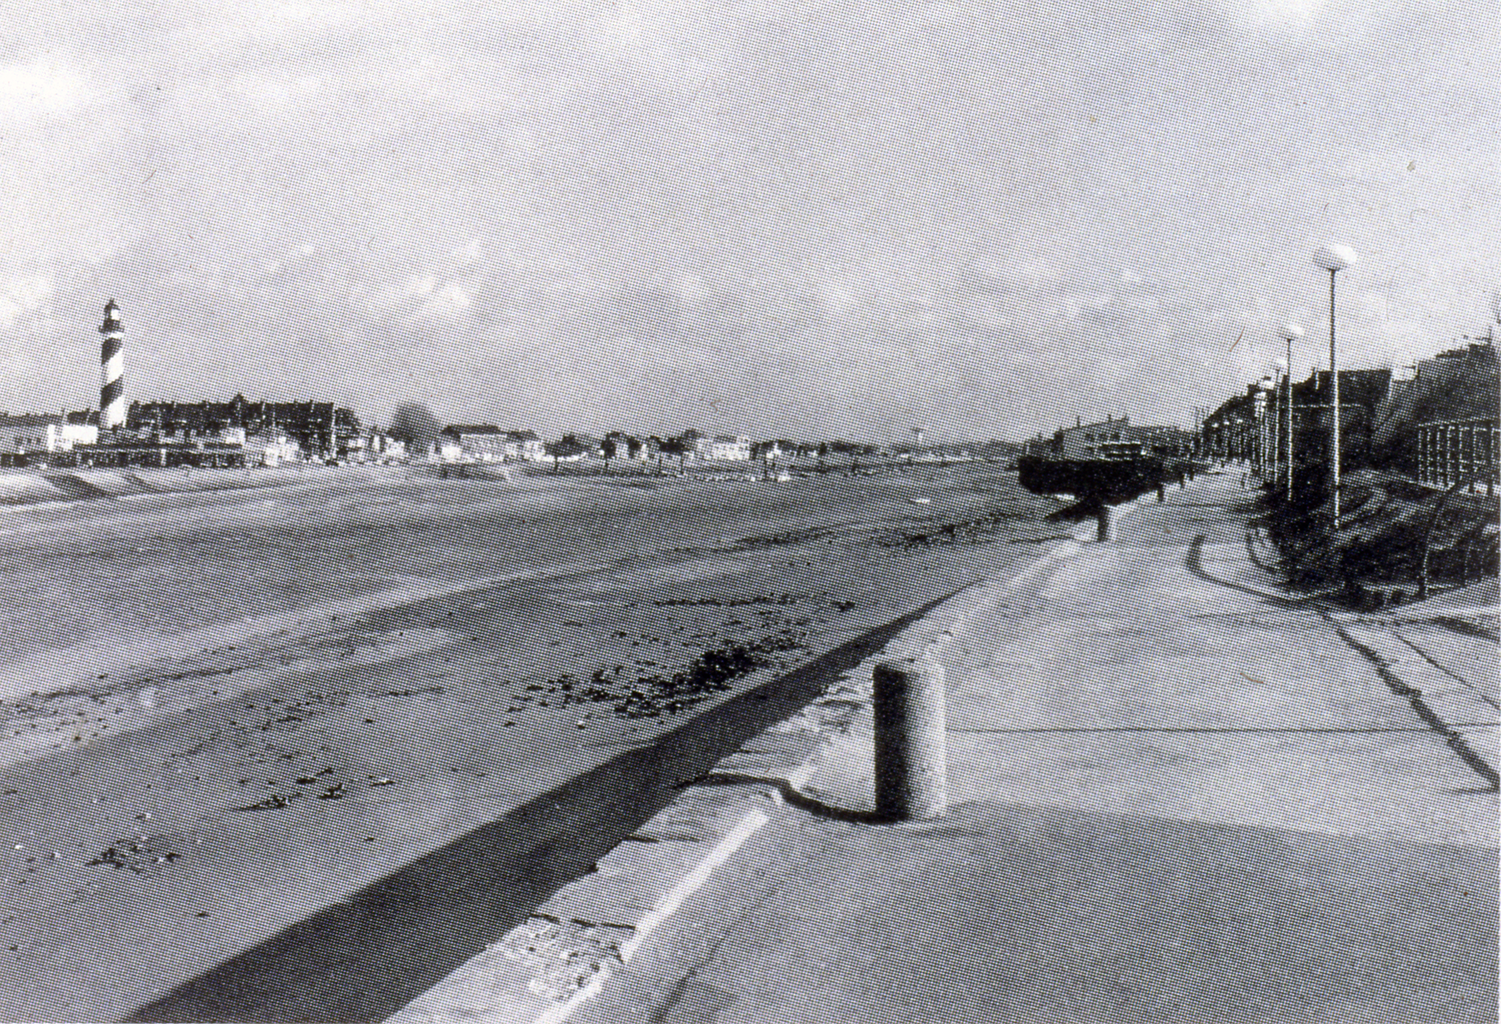 A black and white photograph of a fully evaporated river. To the right, there is a trail with barriers and tall lamps aligned up along it. To the left there is a lighthouse which overlooks a town.